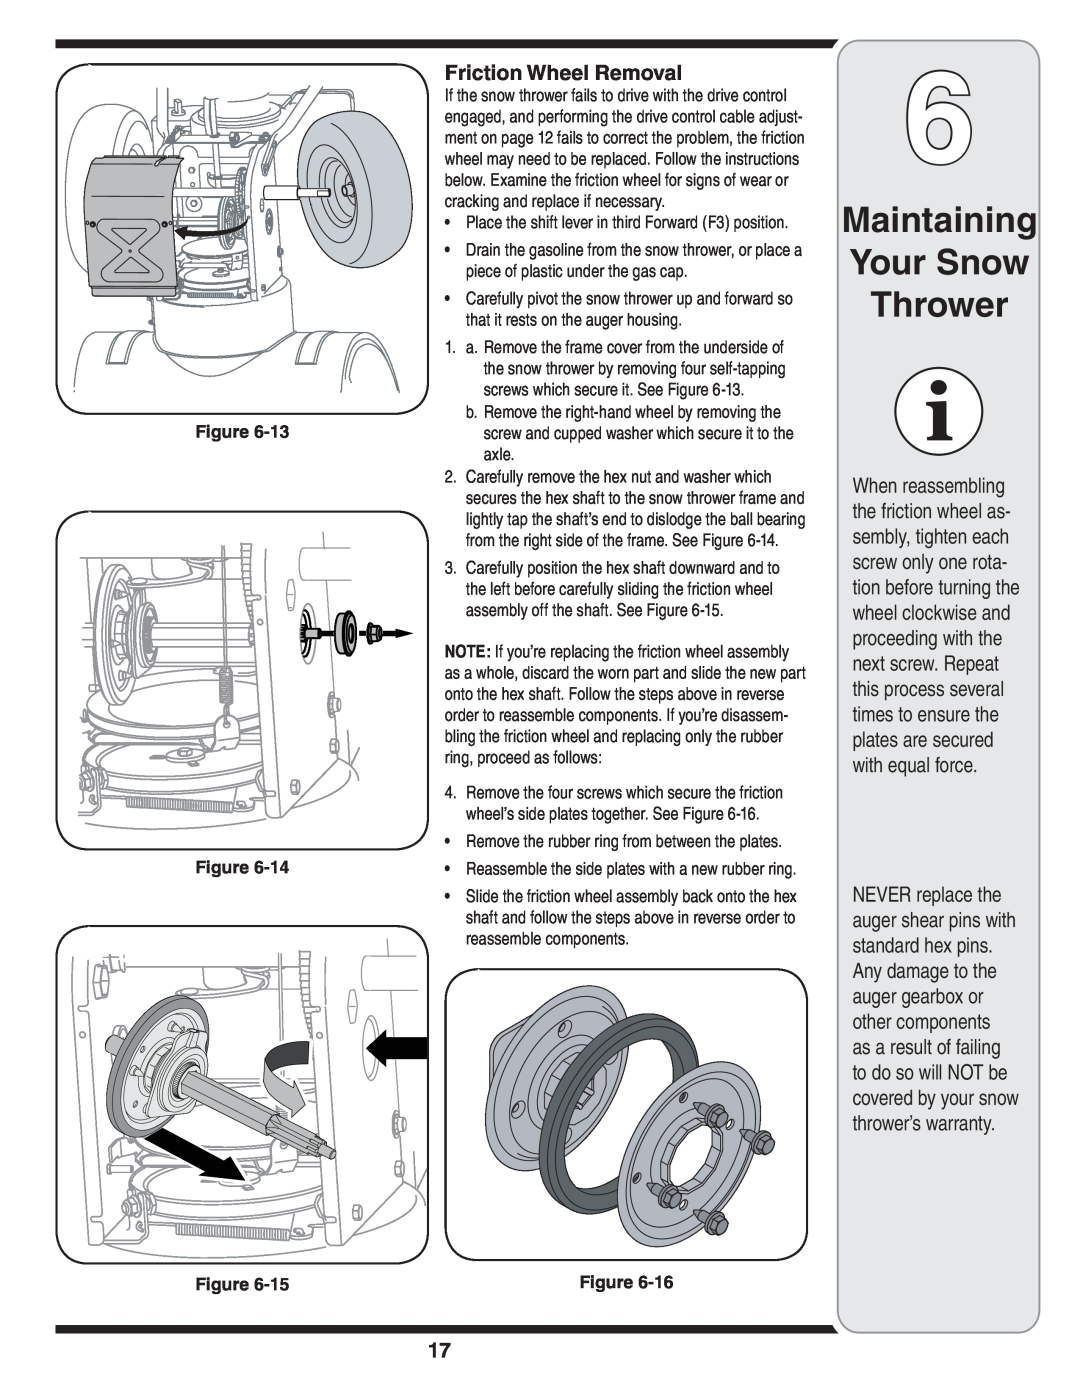 MTD 769-03250 warranty Maintaining Your Snow Thrower, Friction Wheel Removal, Figure Figure Figure 